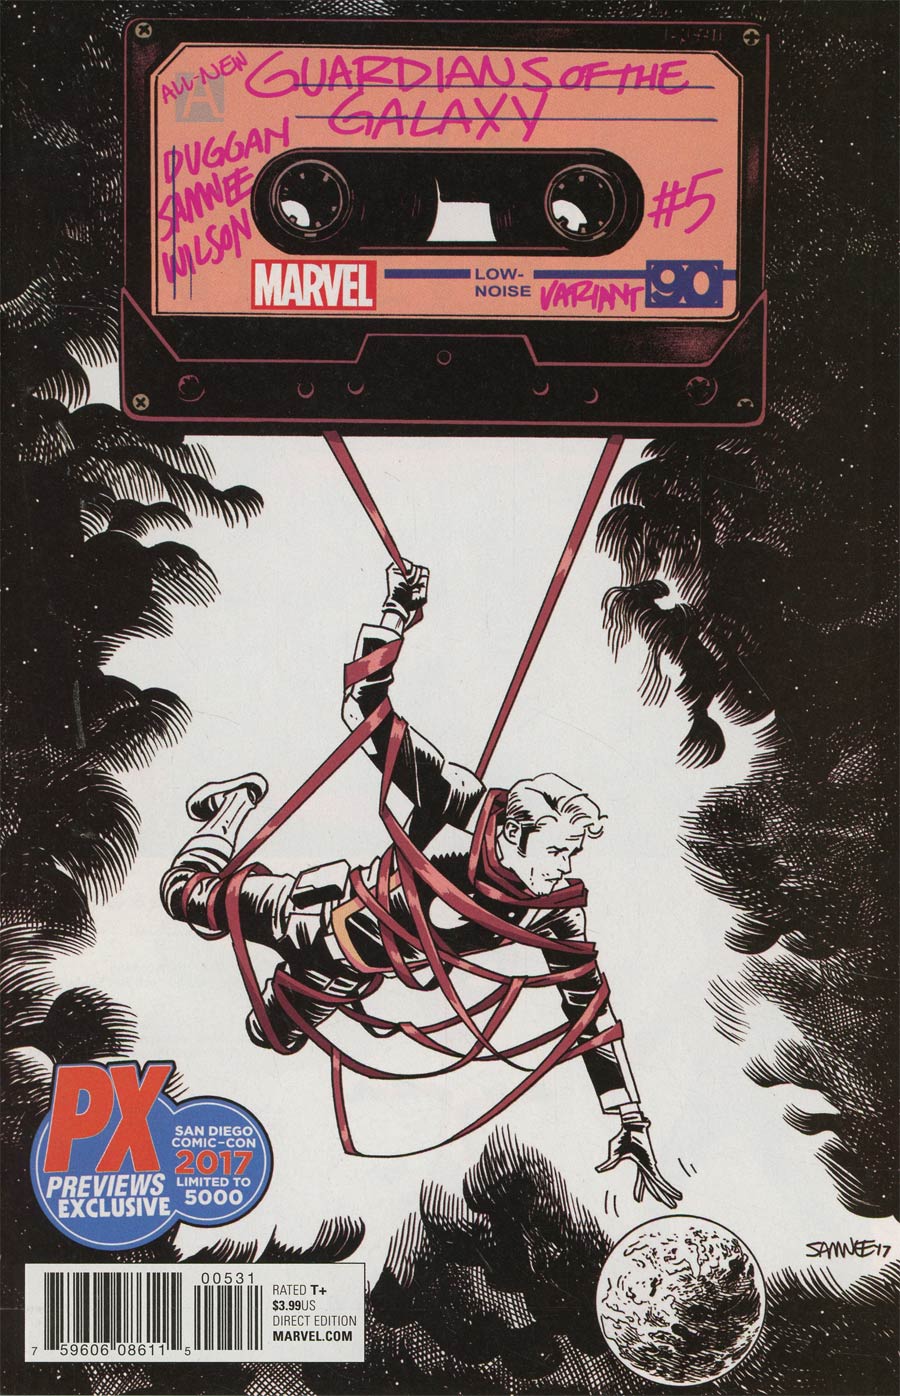 All-New Guardians Of The Galaxy #5 Cover C SDCC 2017 Exclusive Chris Samnee Black & White Variant Cover